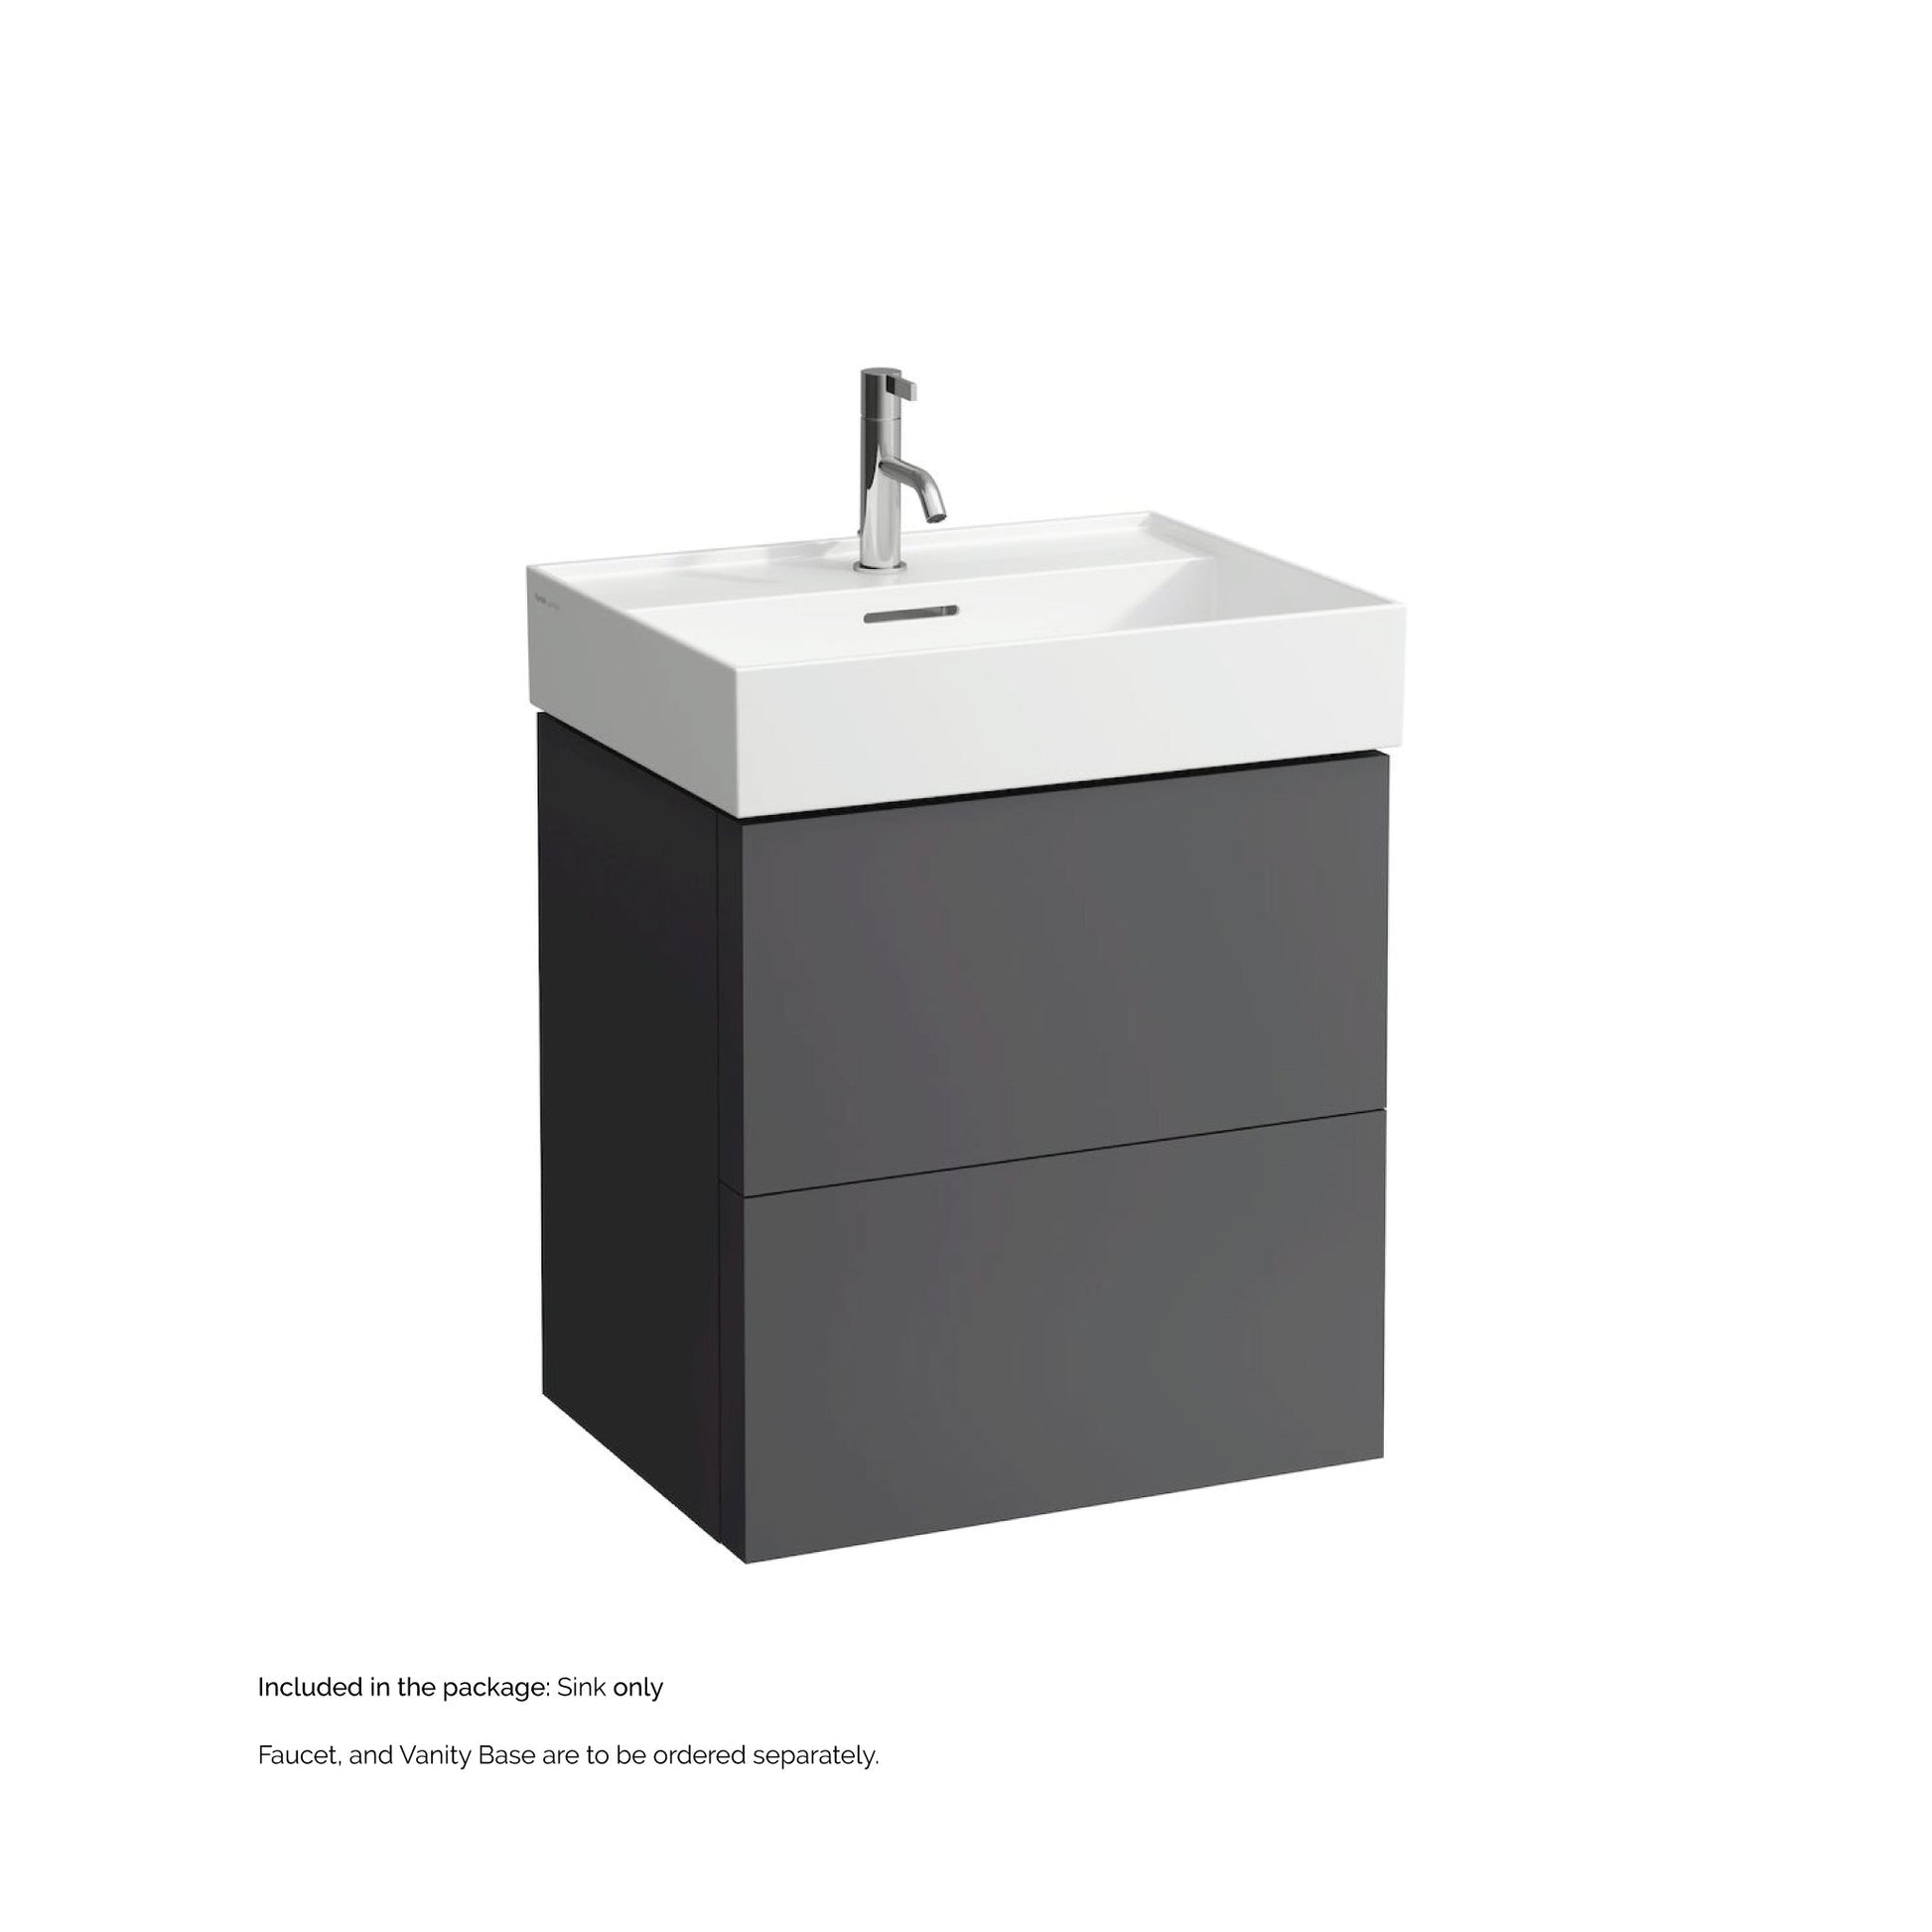 Laufen Kartell 24" x 18" Matte White Wall-Mounted Bathroom Sink With Faucet Hole